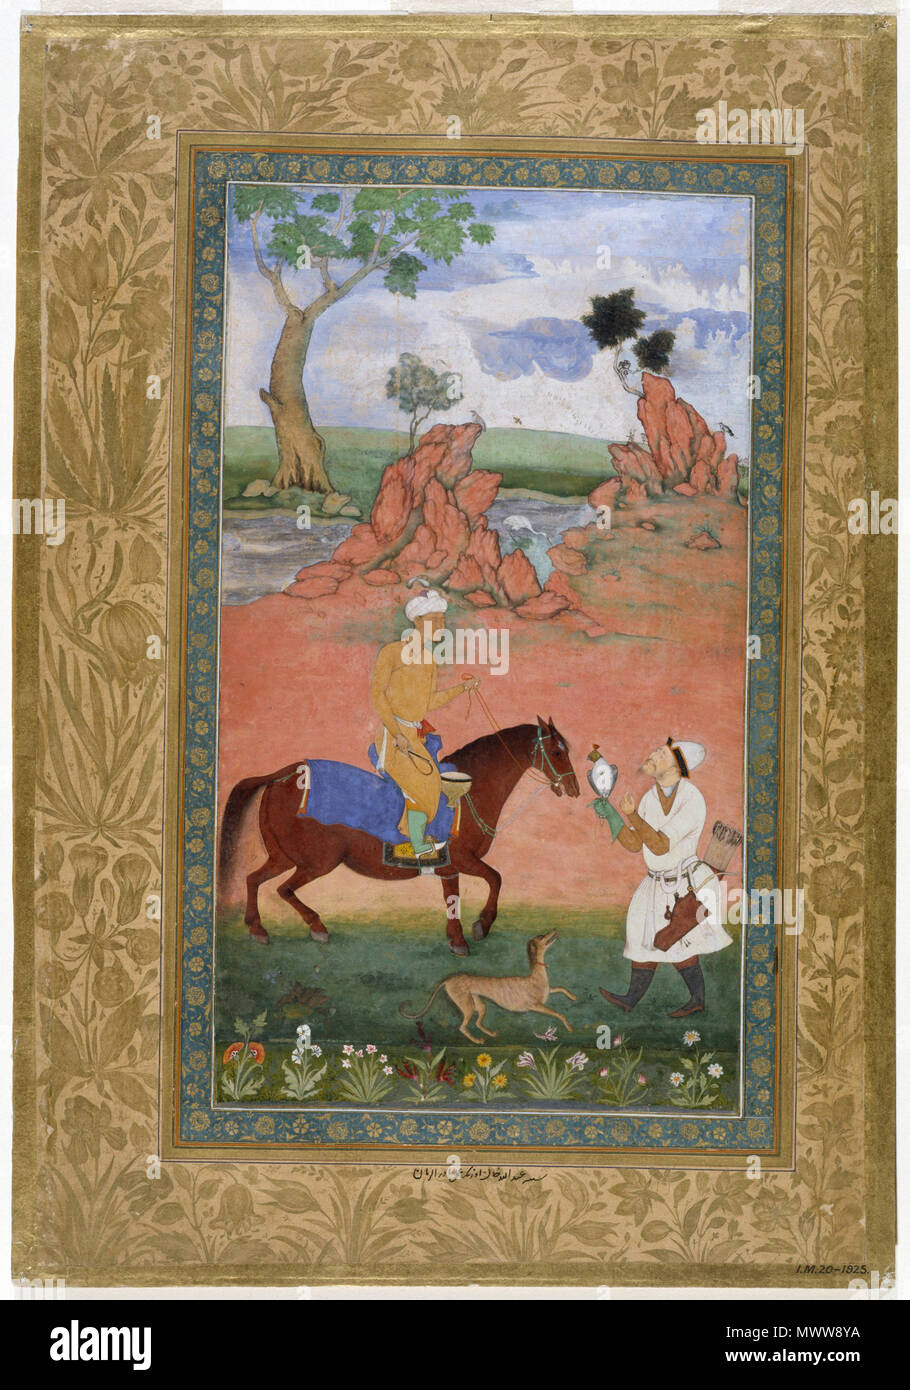 . English: Abdullah Khna II of the Shaybanid dynasty ruled Transsoxiana from his capital at Bukhara from 1583-1598. He is attended by a falconer with a hooded bird and his saddle is a falconer's drum . circa 1618(made). Unknown 23 Abdullah Khan Uzbeg out hawking Stock Photo